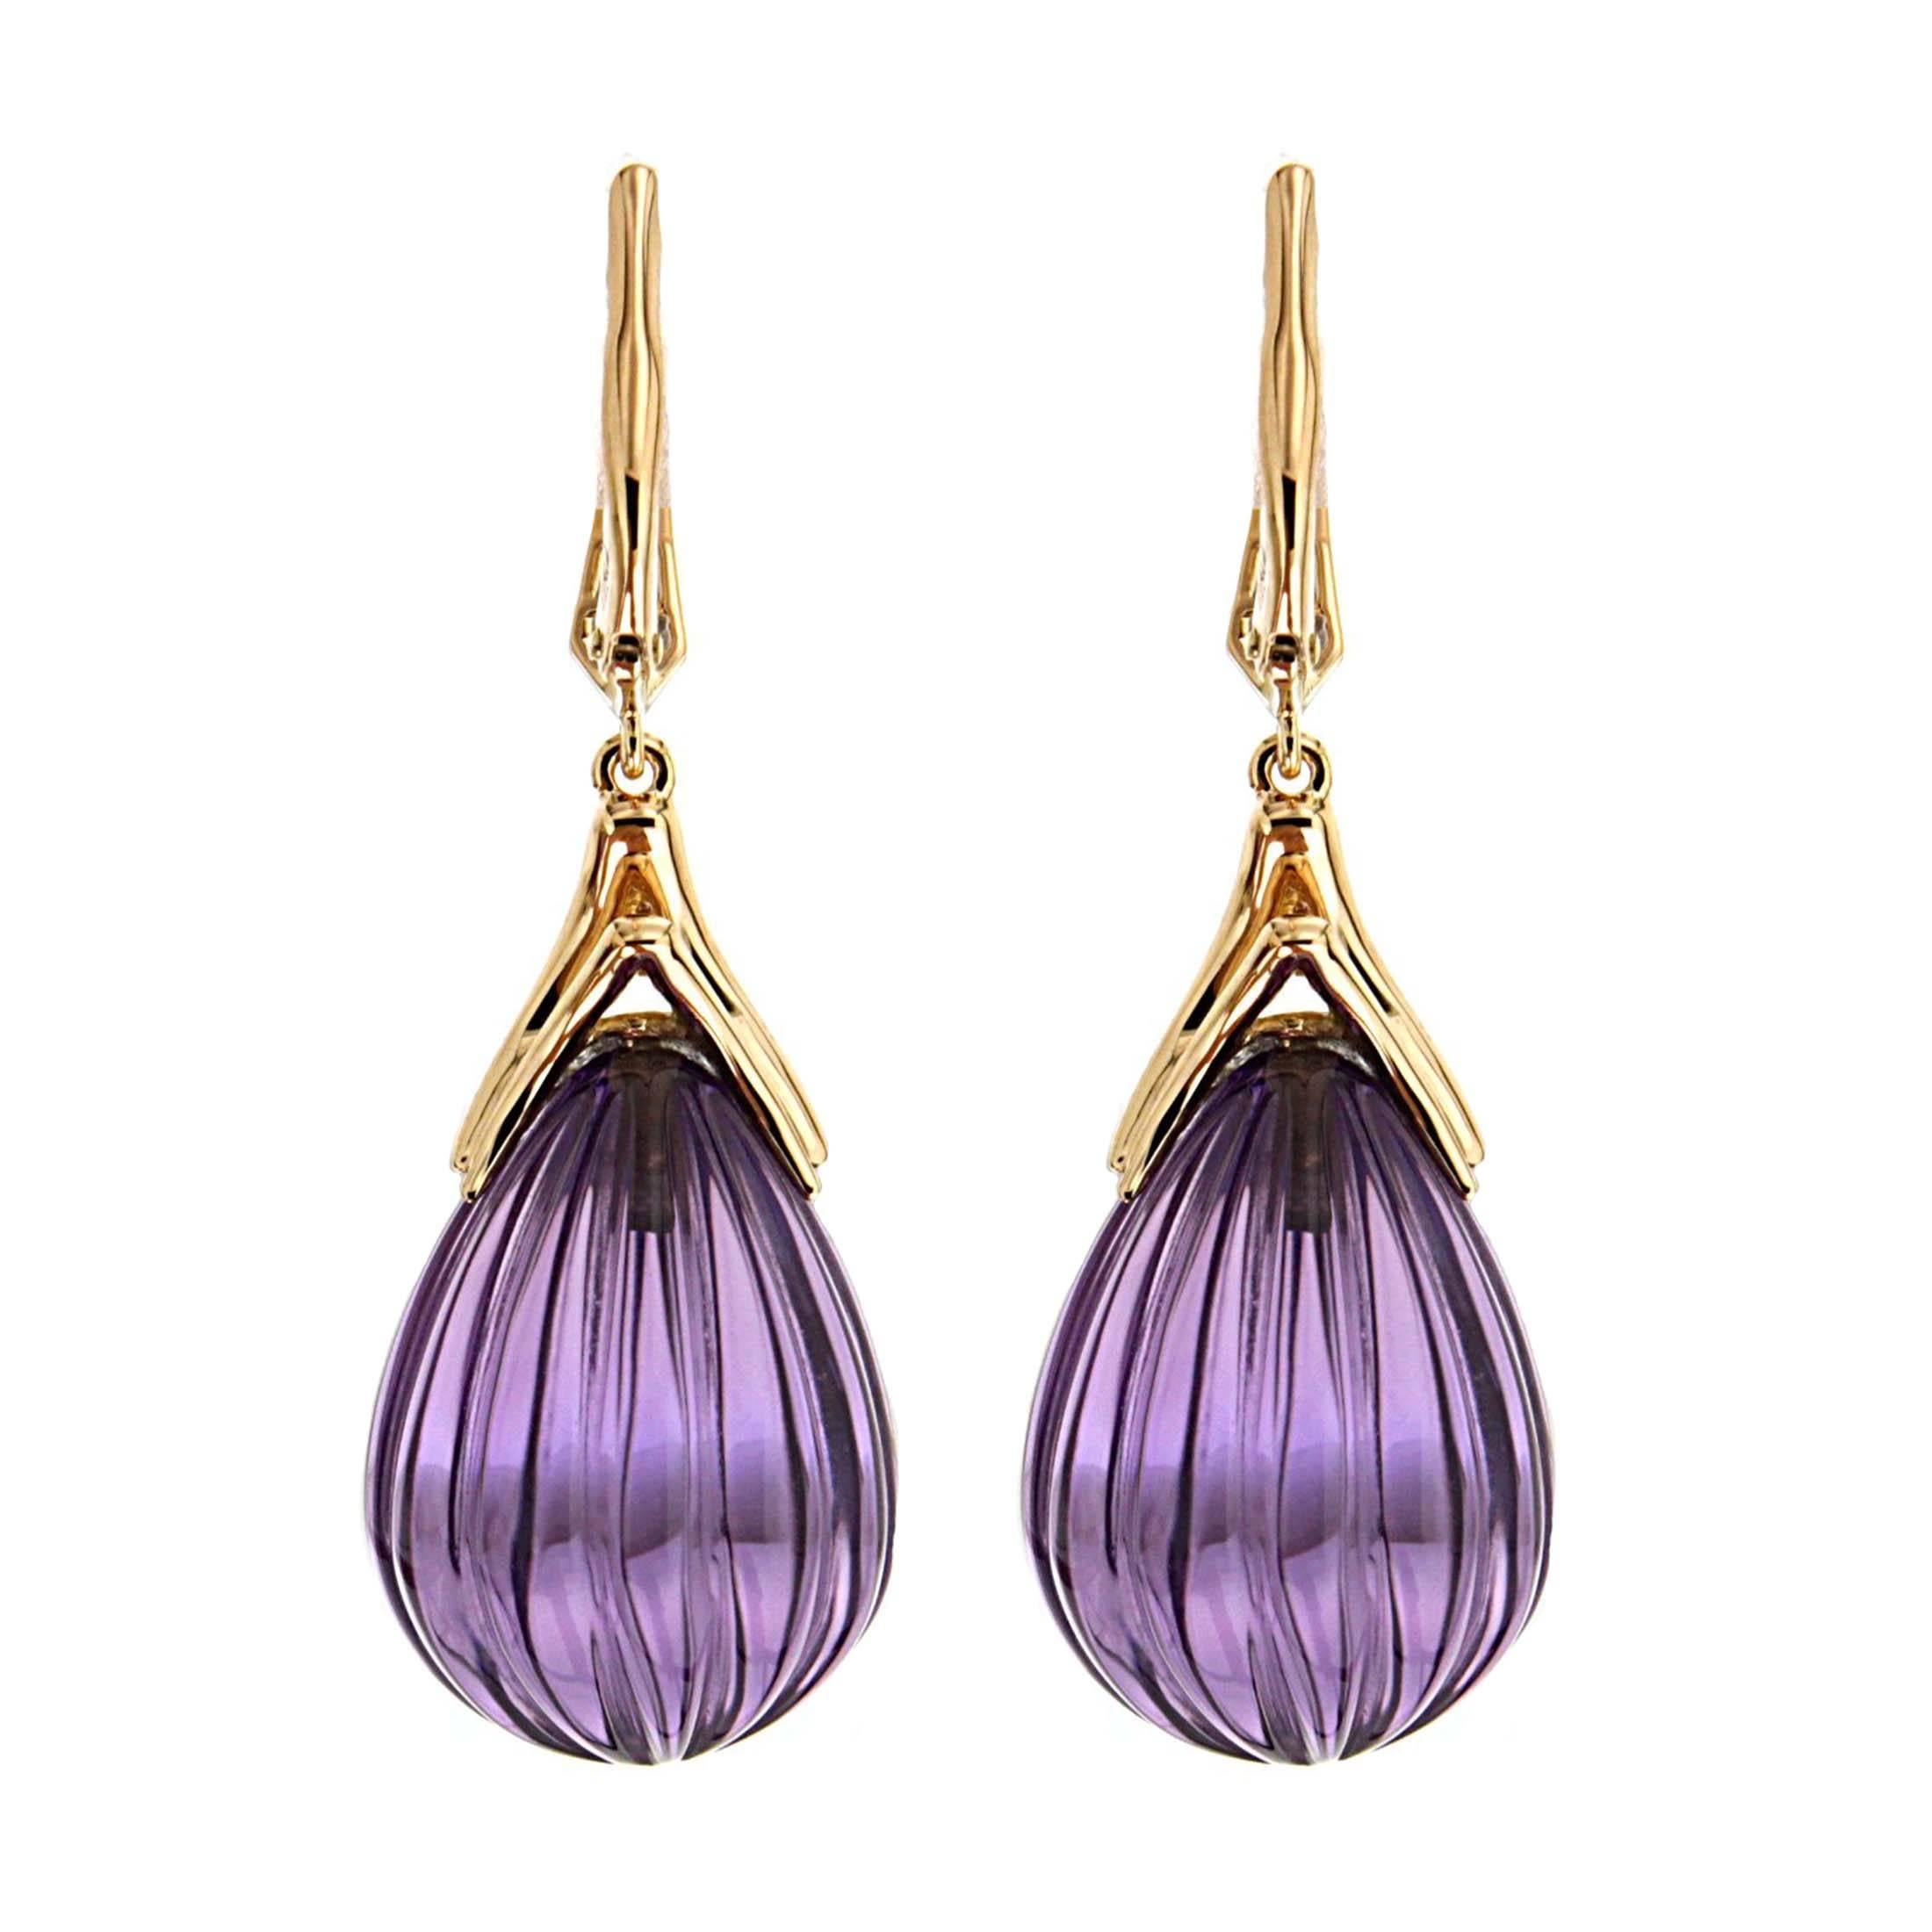 This lovely pair of earrings features carved drop of amethysts with gold curvy cap. The earrings are completed with diamond lever backs in 18kt Yellow Gold.